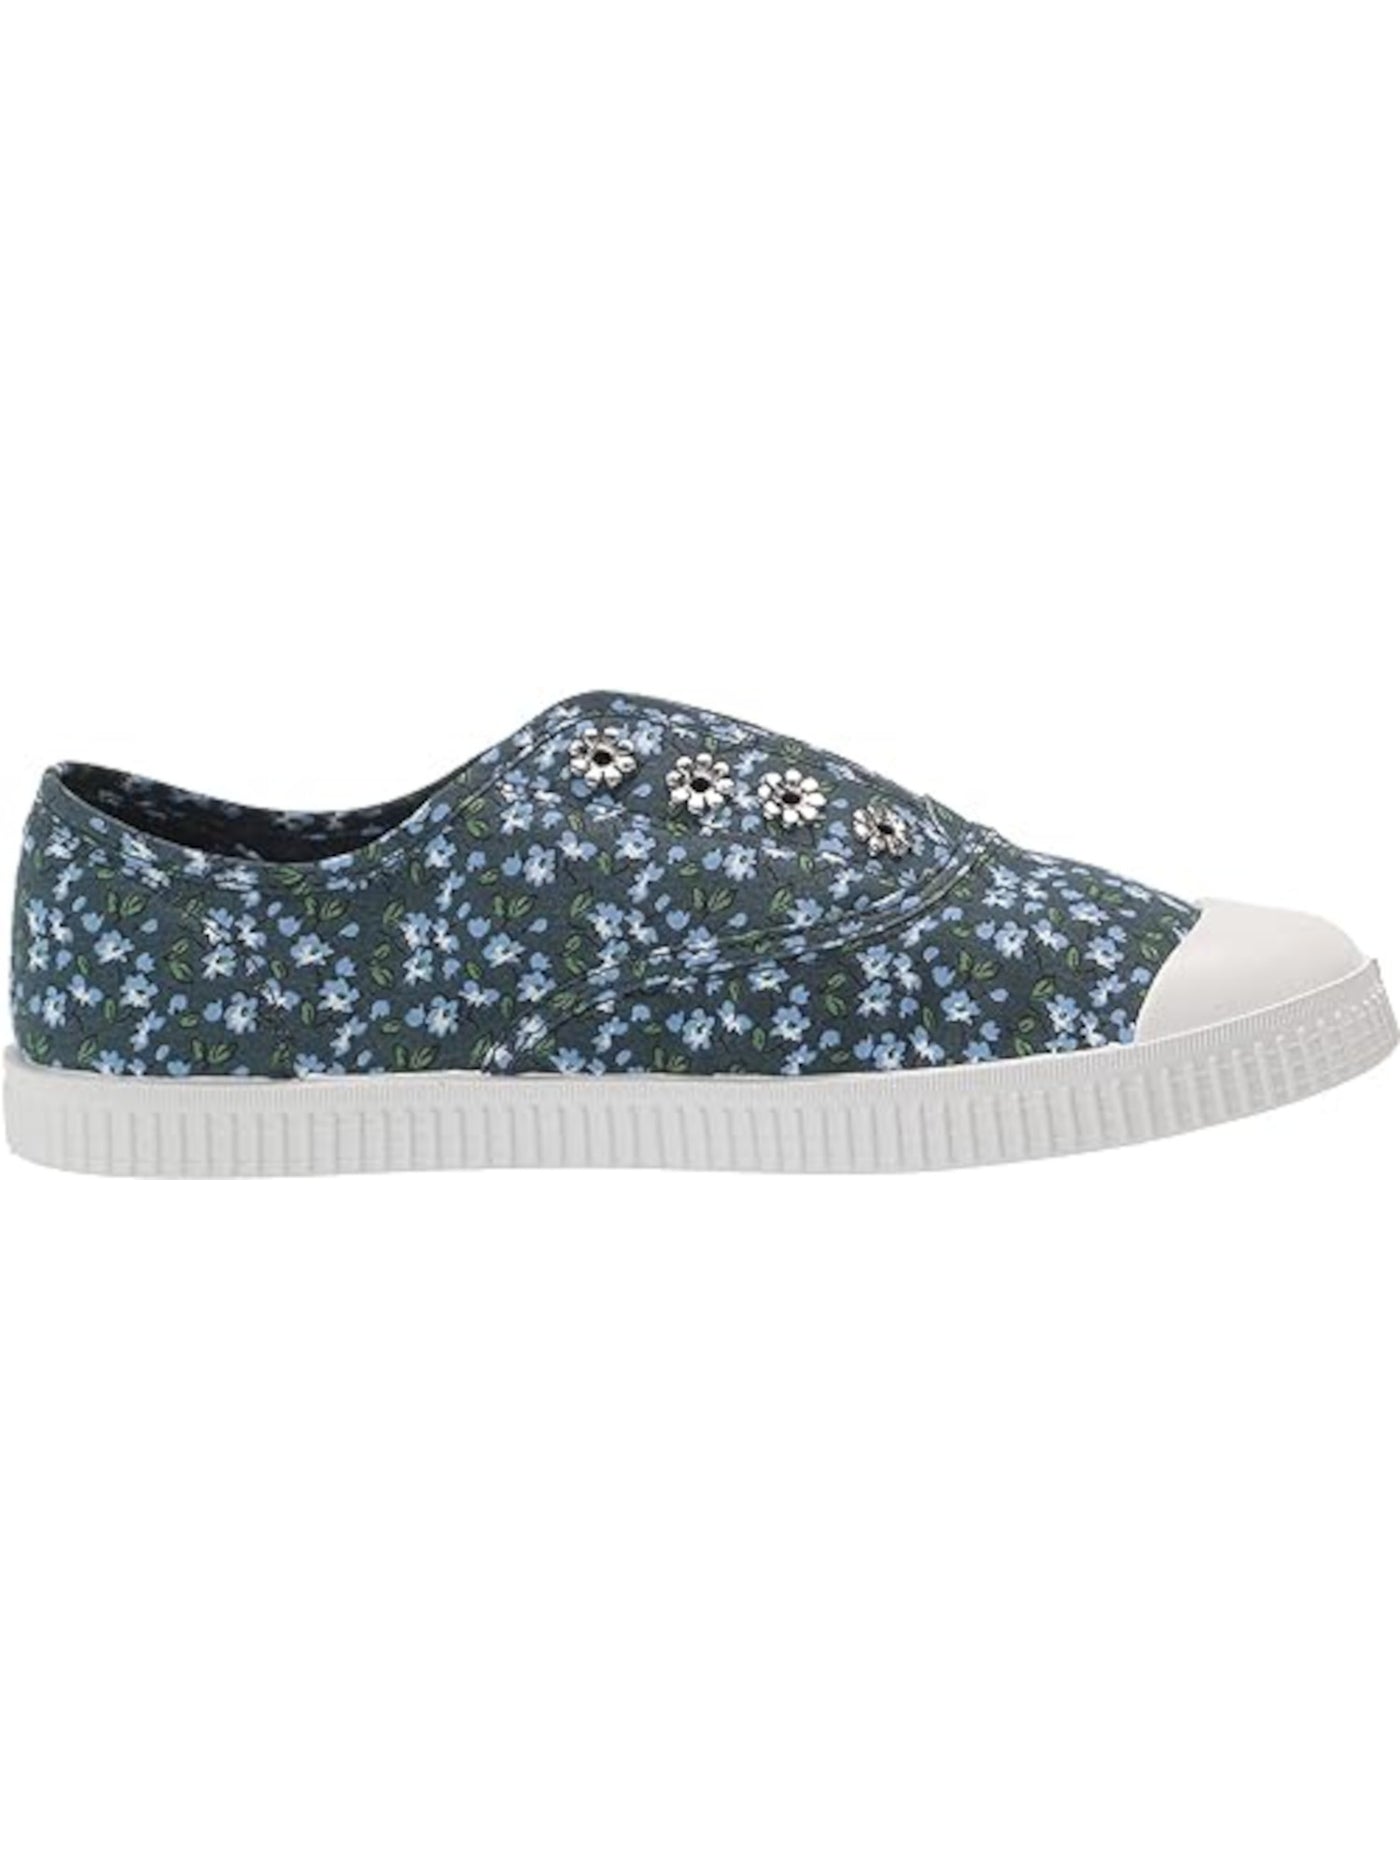 XOXO Womens Blue Floral Comfort Azie Round Toe Slip On Sneakers Shoes 7.5 M